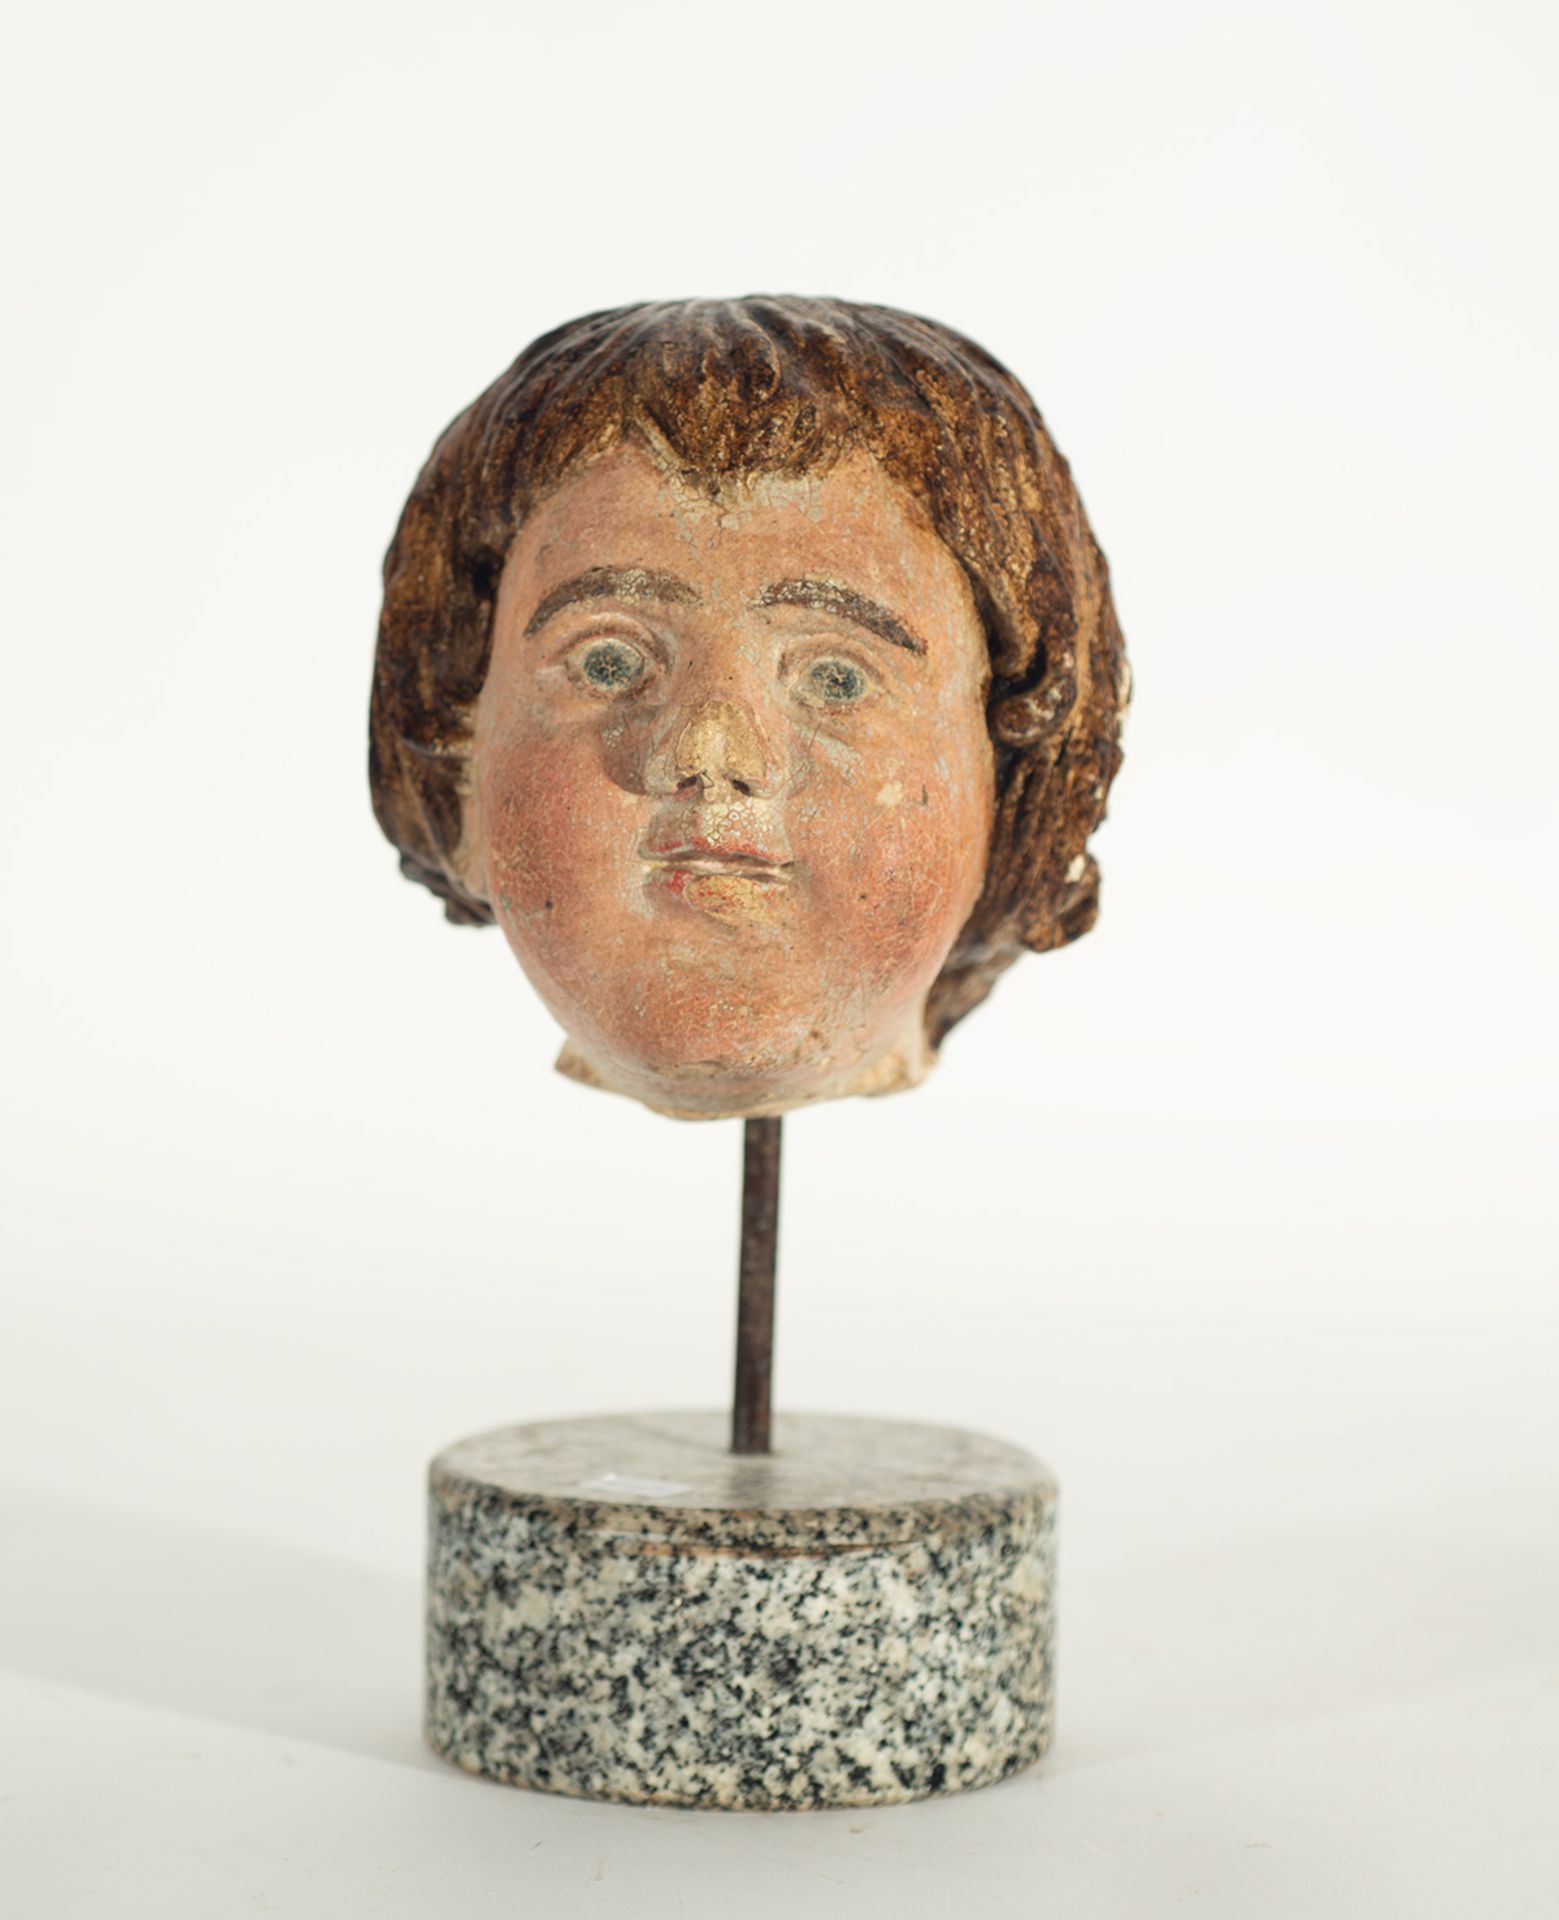 Head of San Juanito in polychrome stone, Spain, 16th century